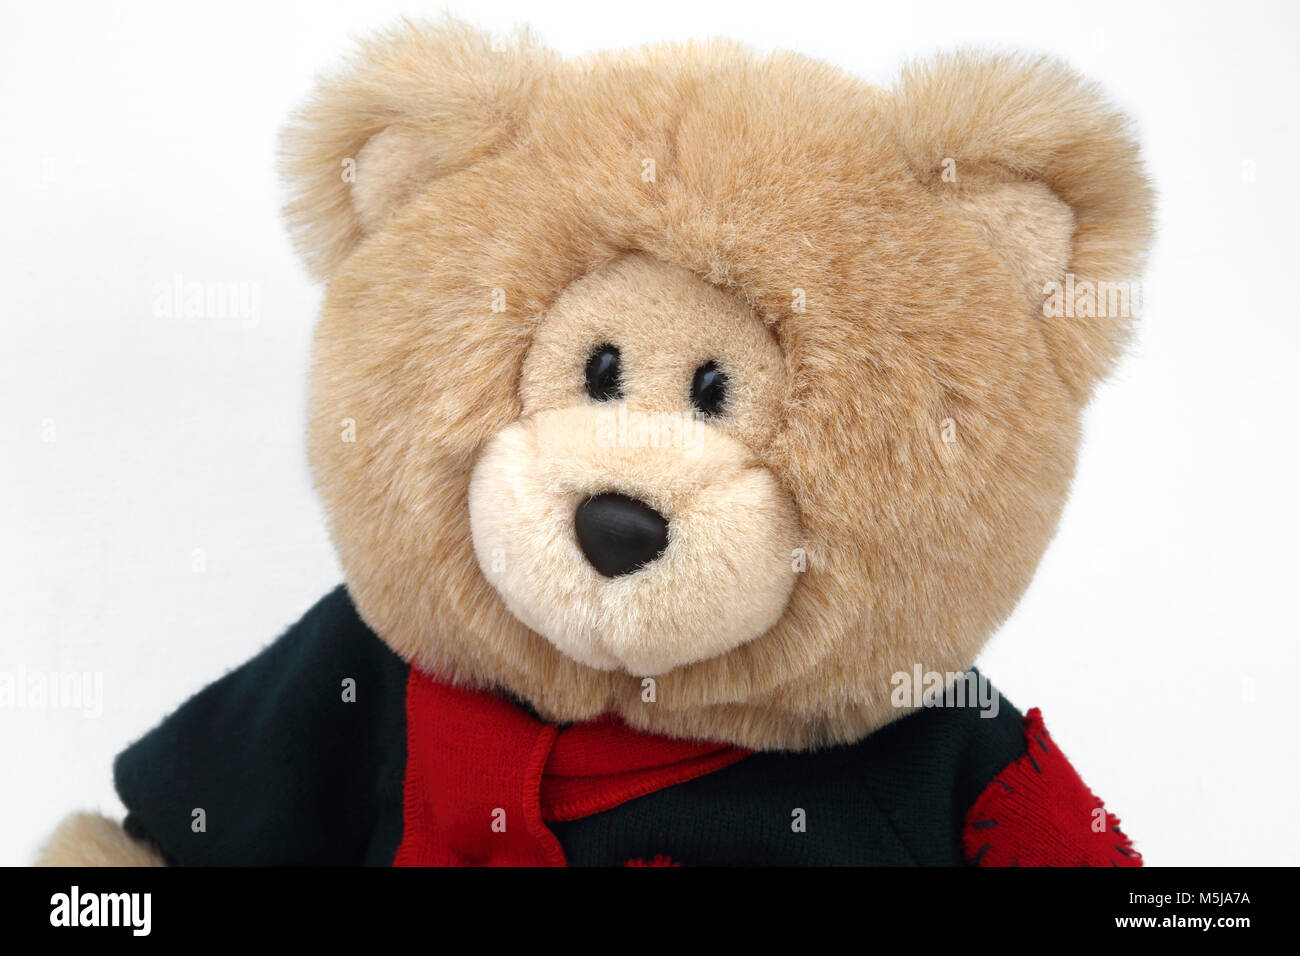 Large Plush Cuddly Teddy Bear with Green Jumper and Red Scarf Stock Photo